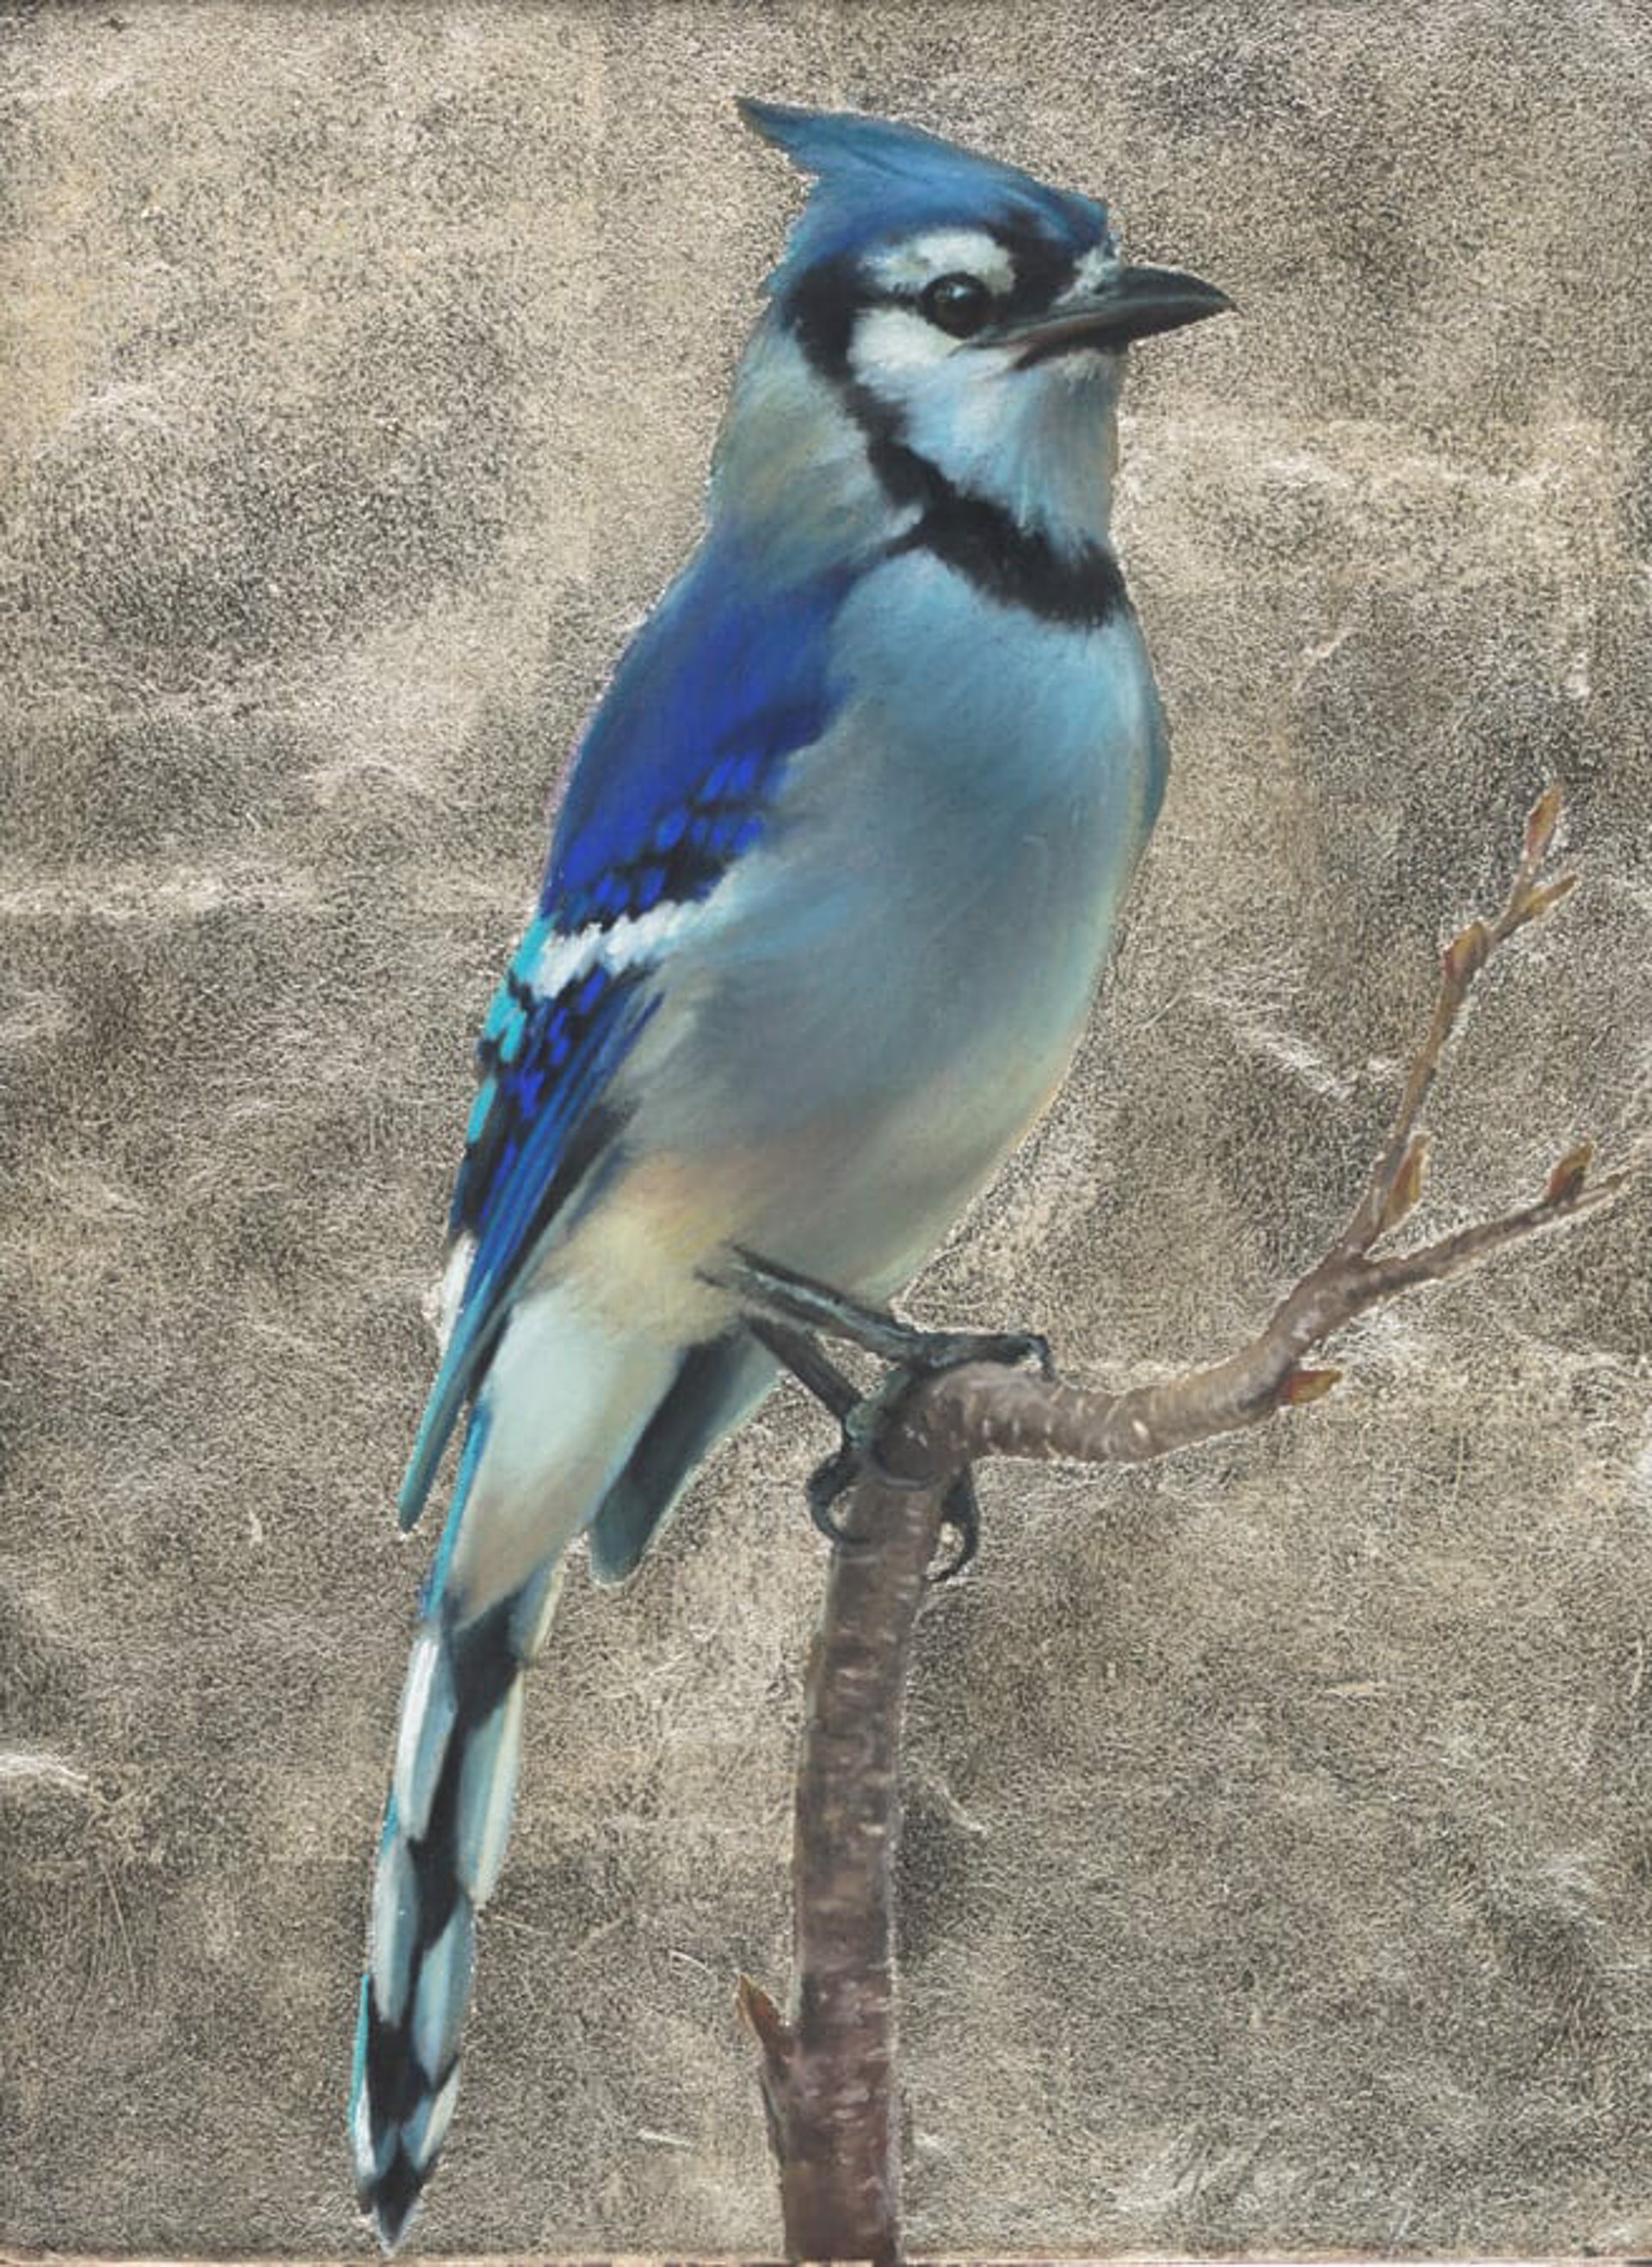 Bluejay by Anne McGrory